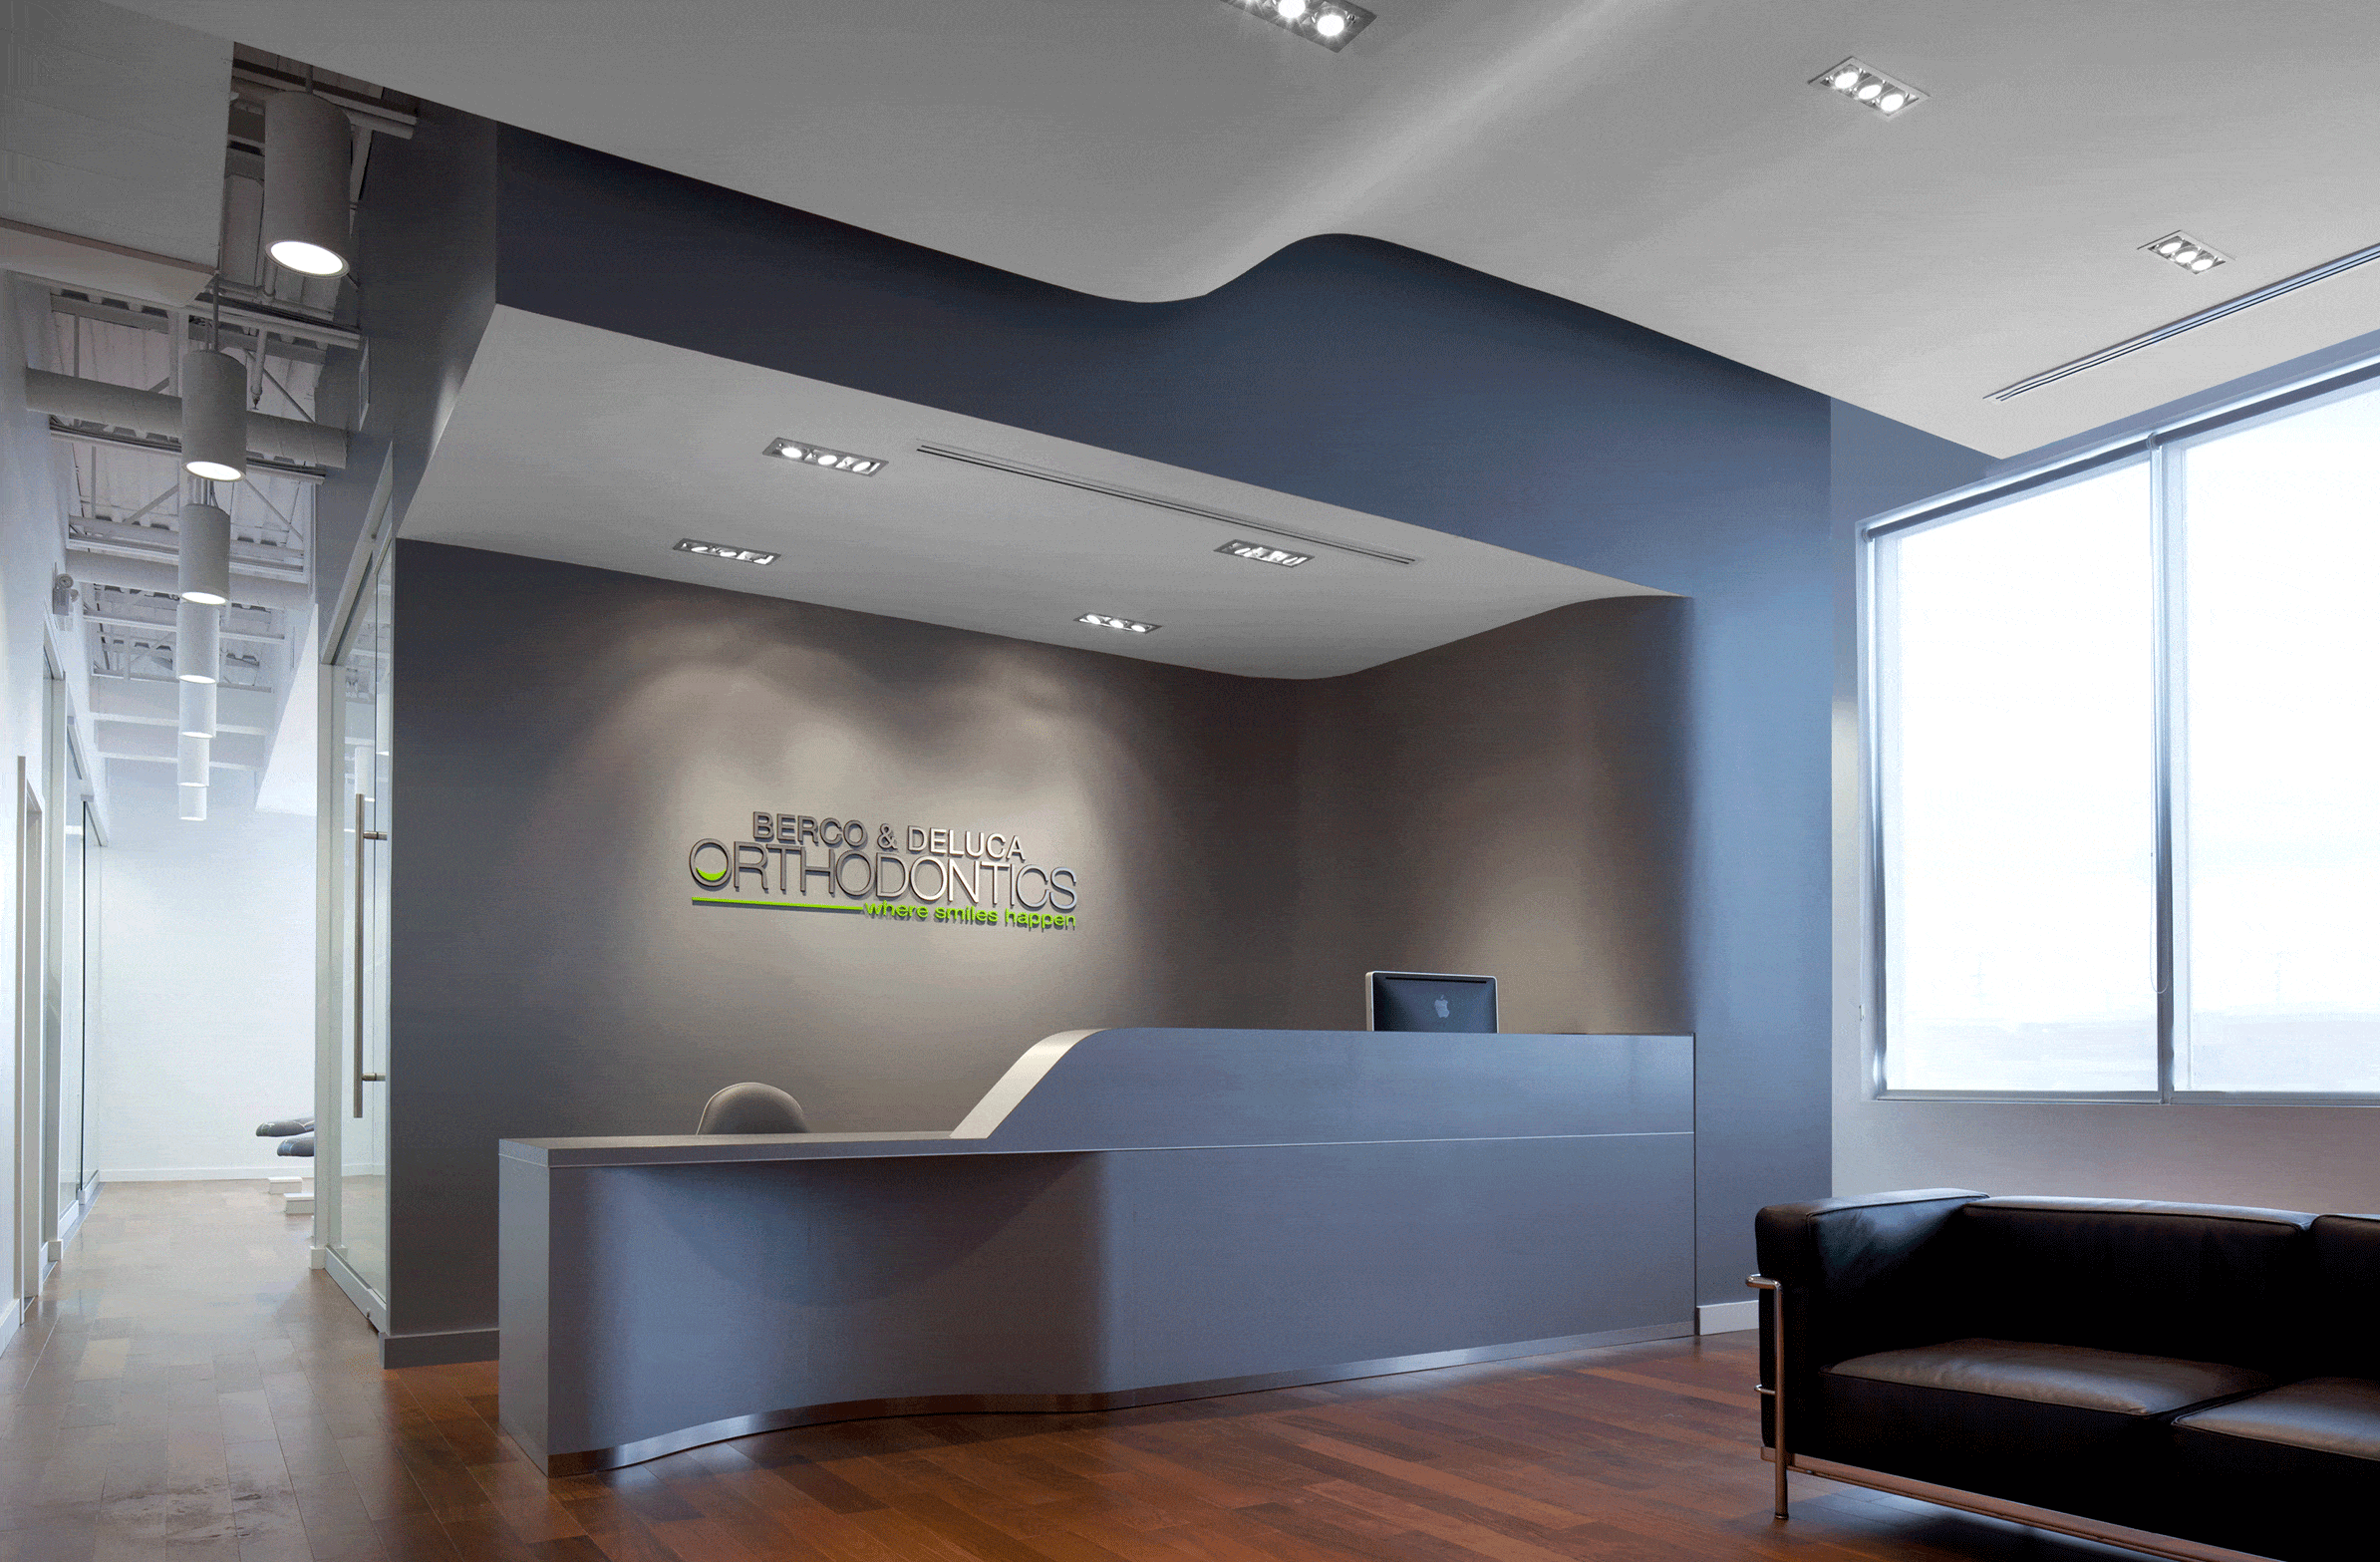 related project title Berco & Deluca Orthodontics